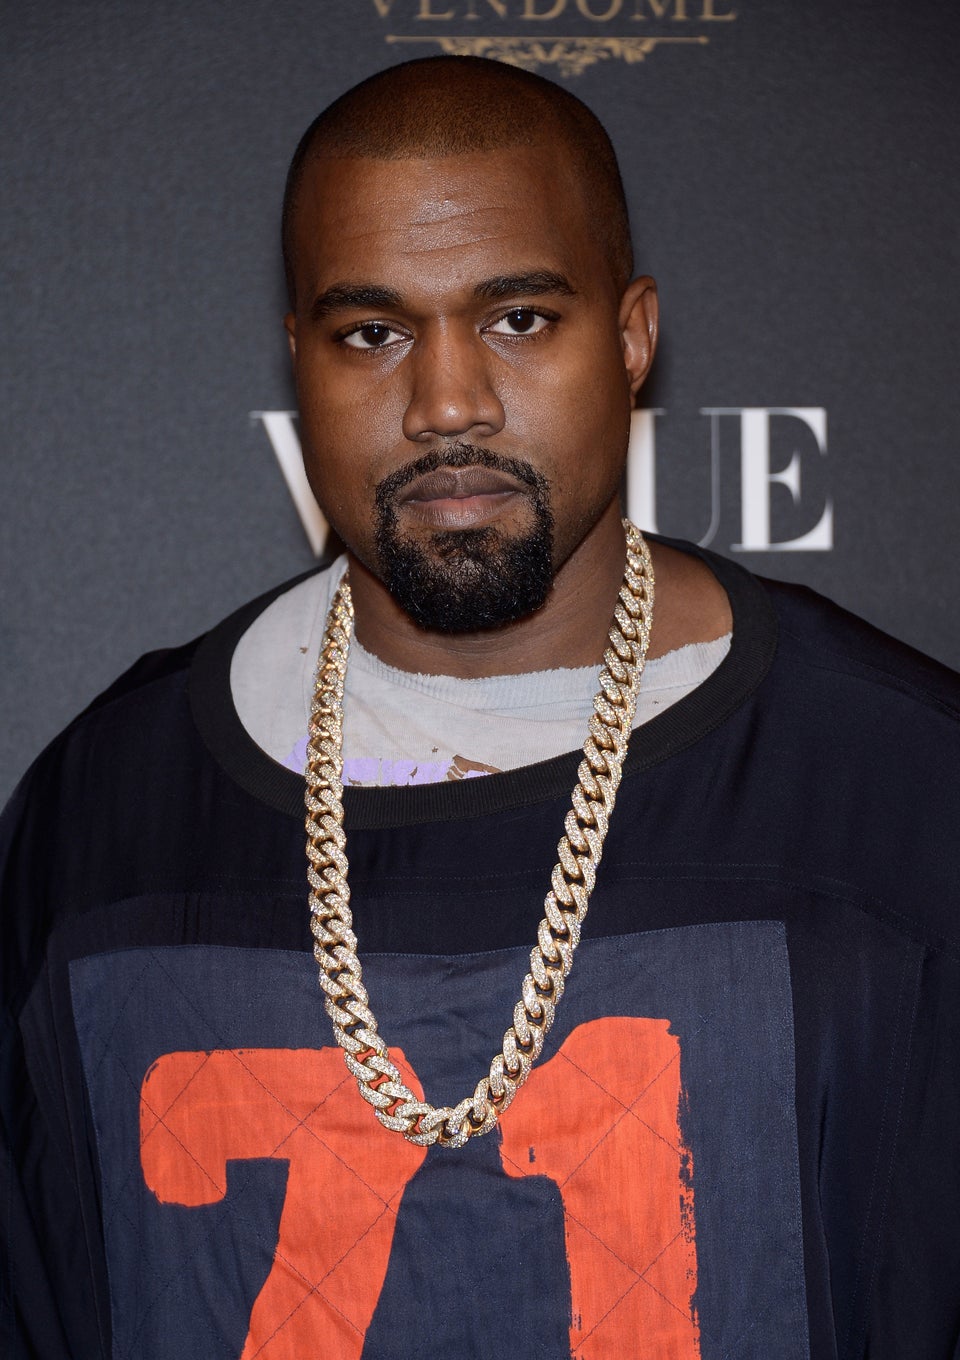 Are We Limiting Kanye West’s Creative Expression?